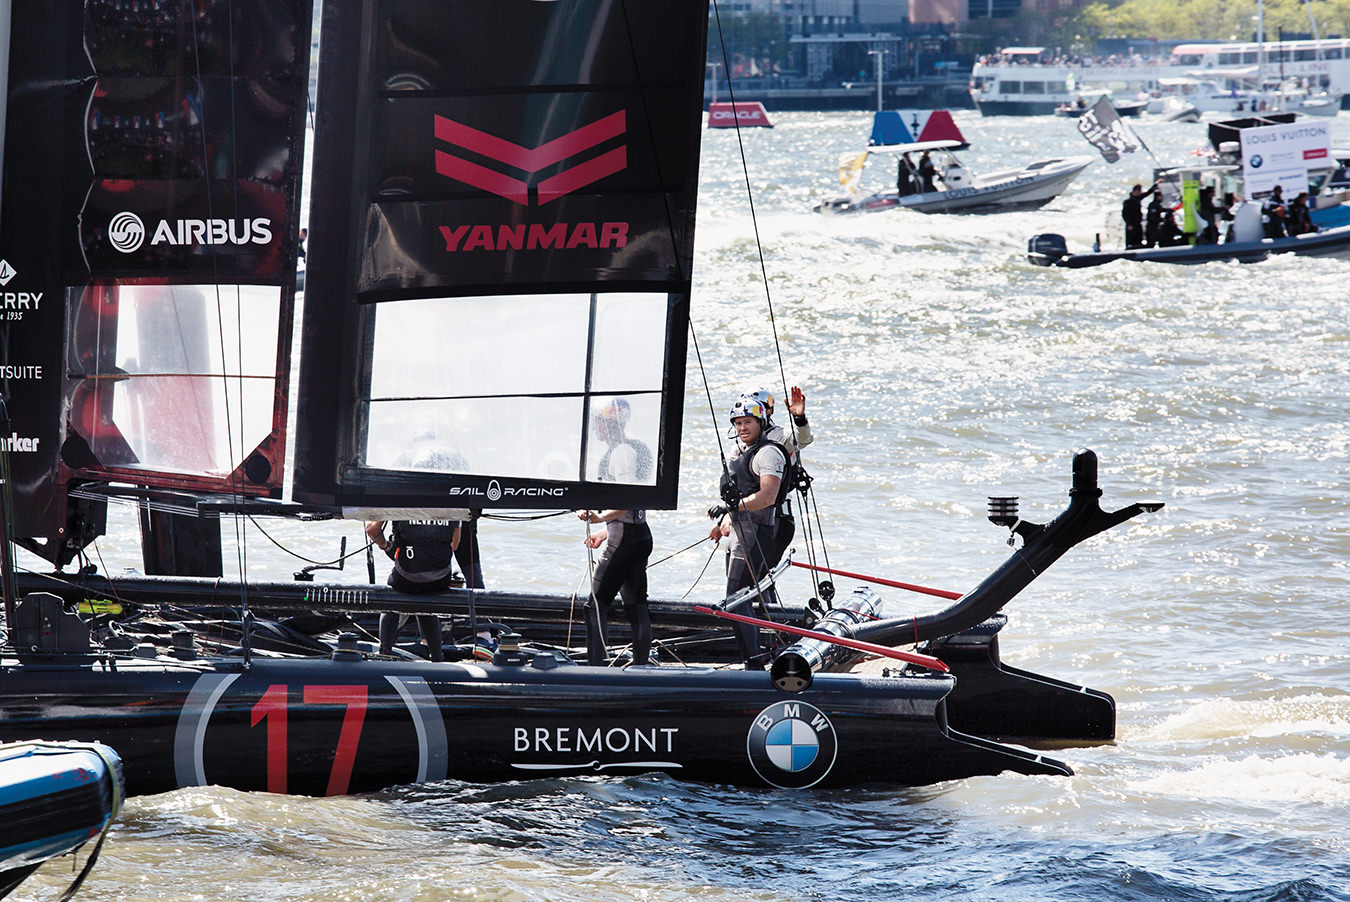 Louis Vuitton's Role in America's Cup